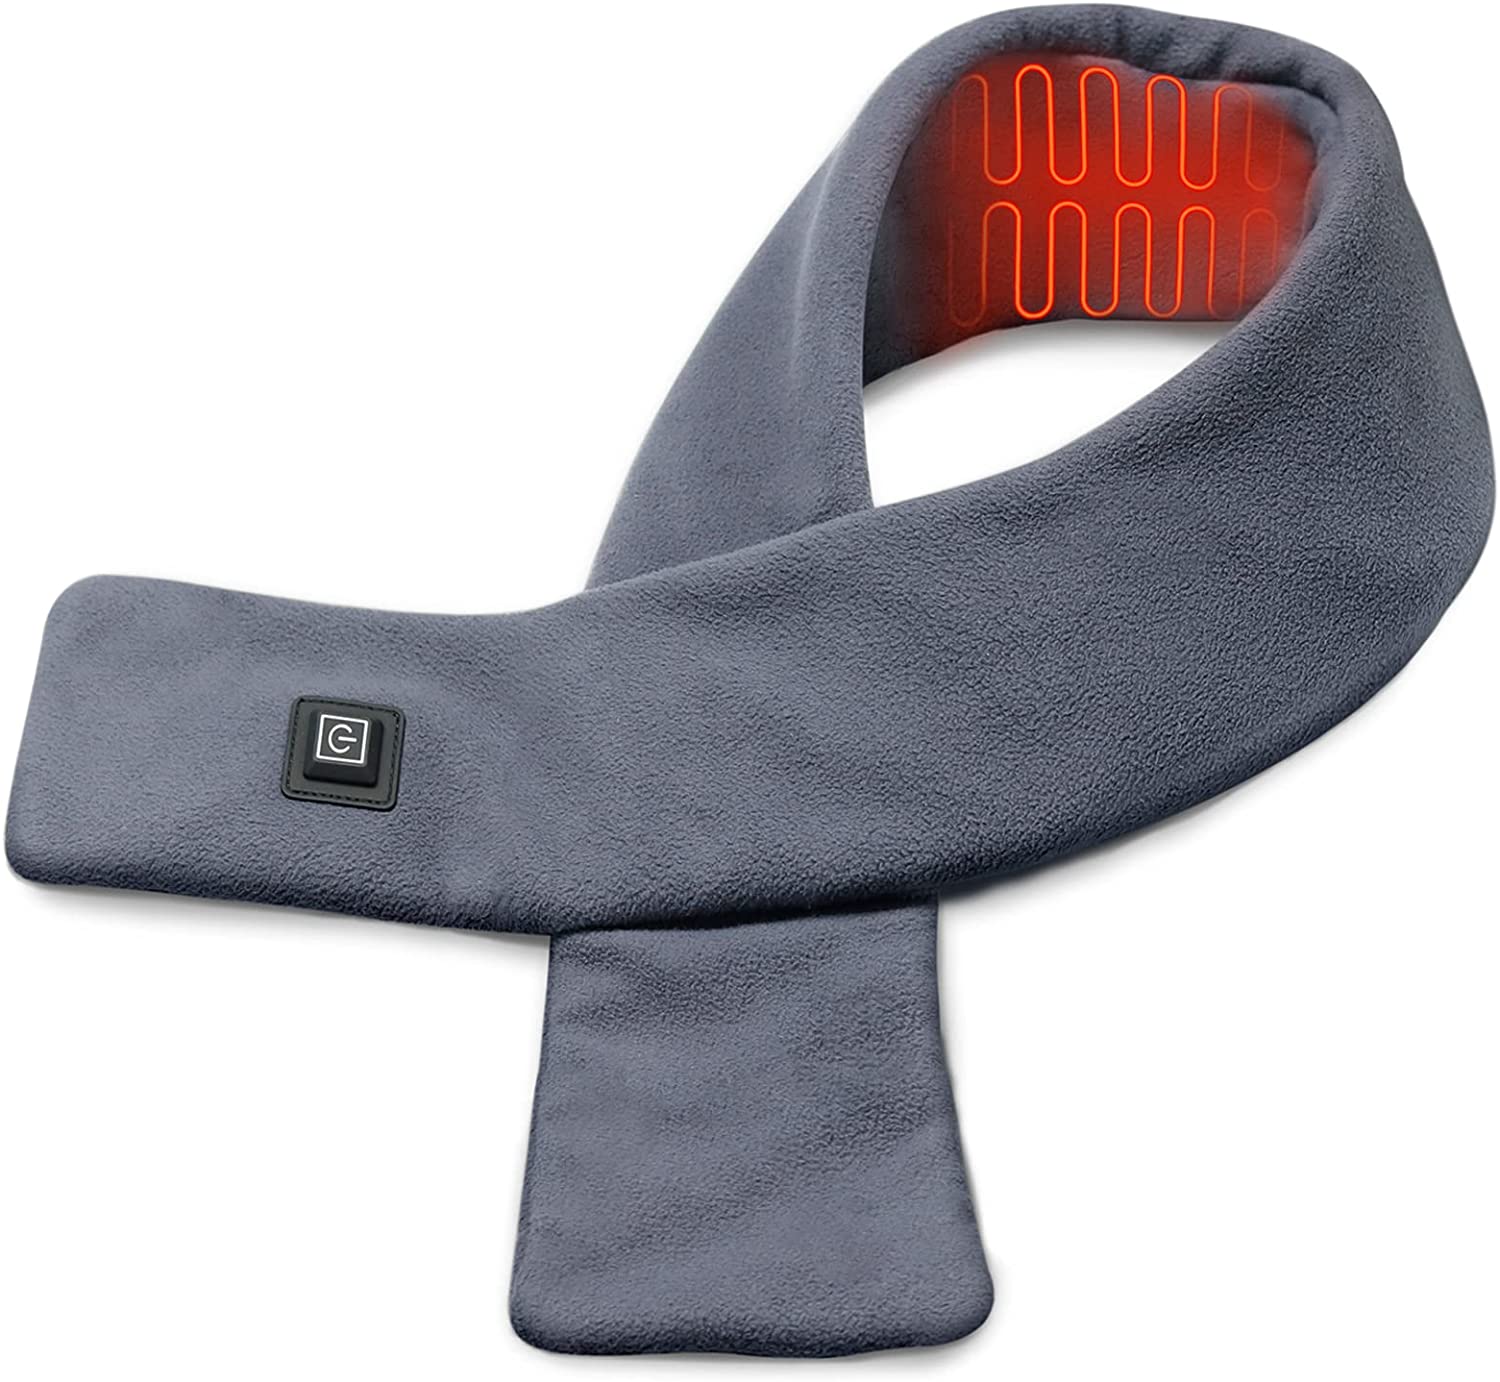 The New Trend in Best far Infrared Heating Pad 1